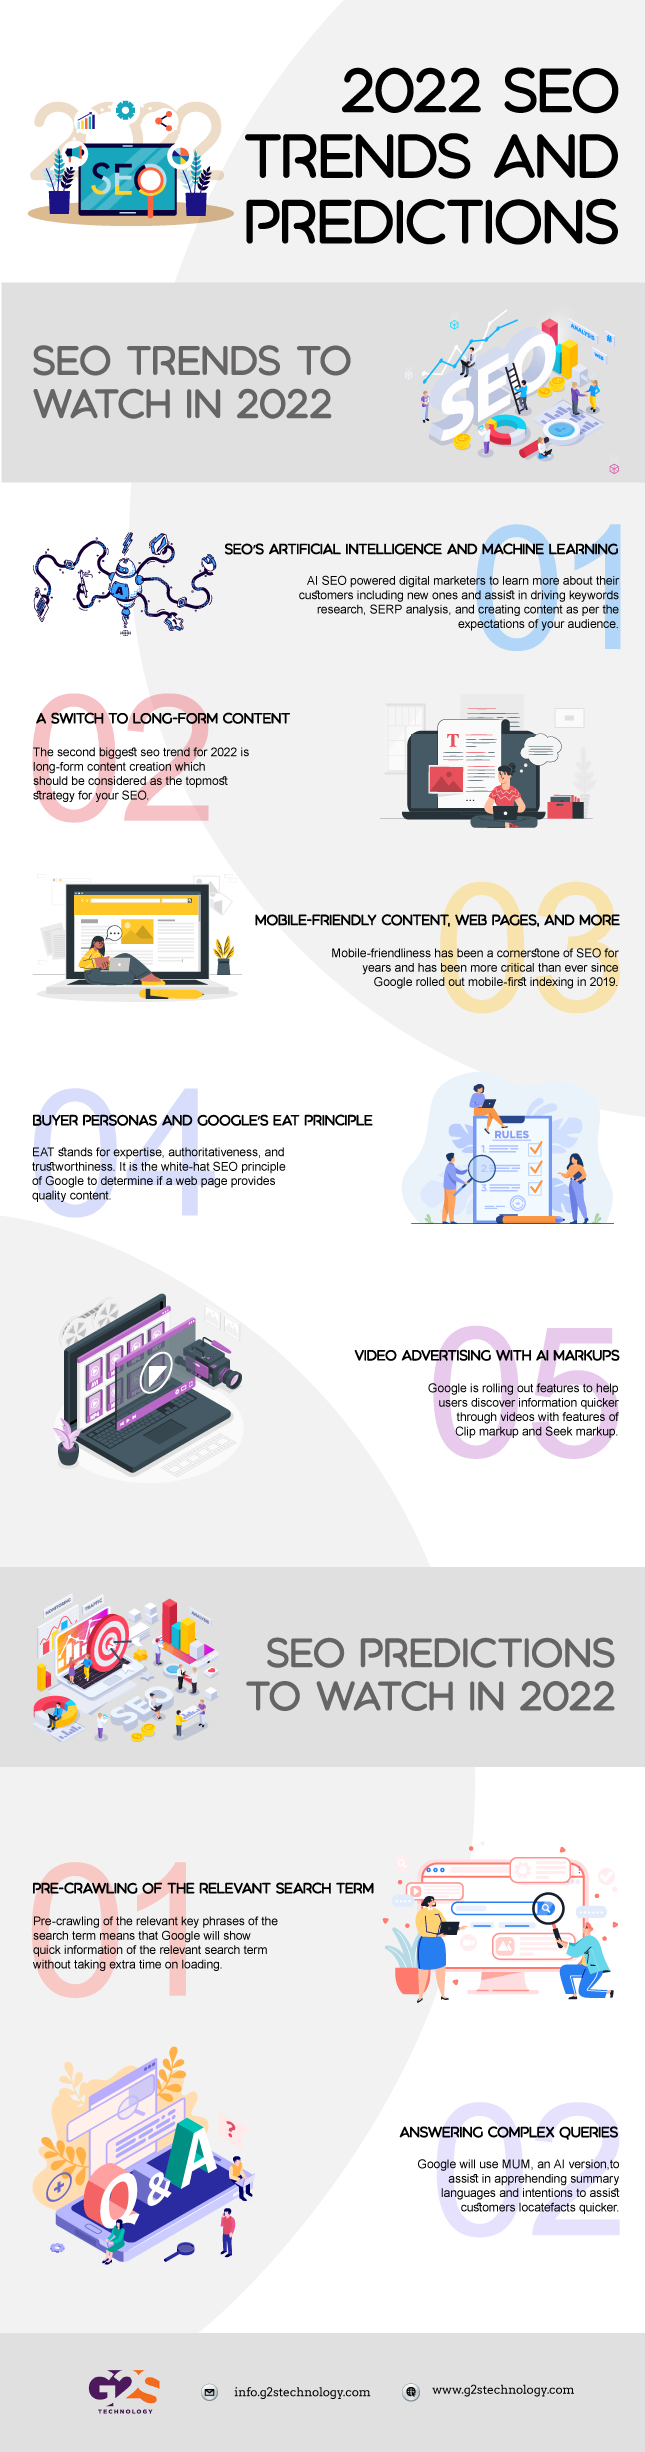 2022 seo trends and prediction infographic